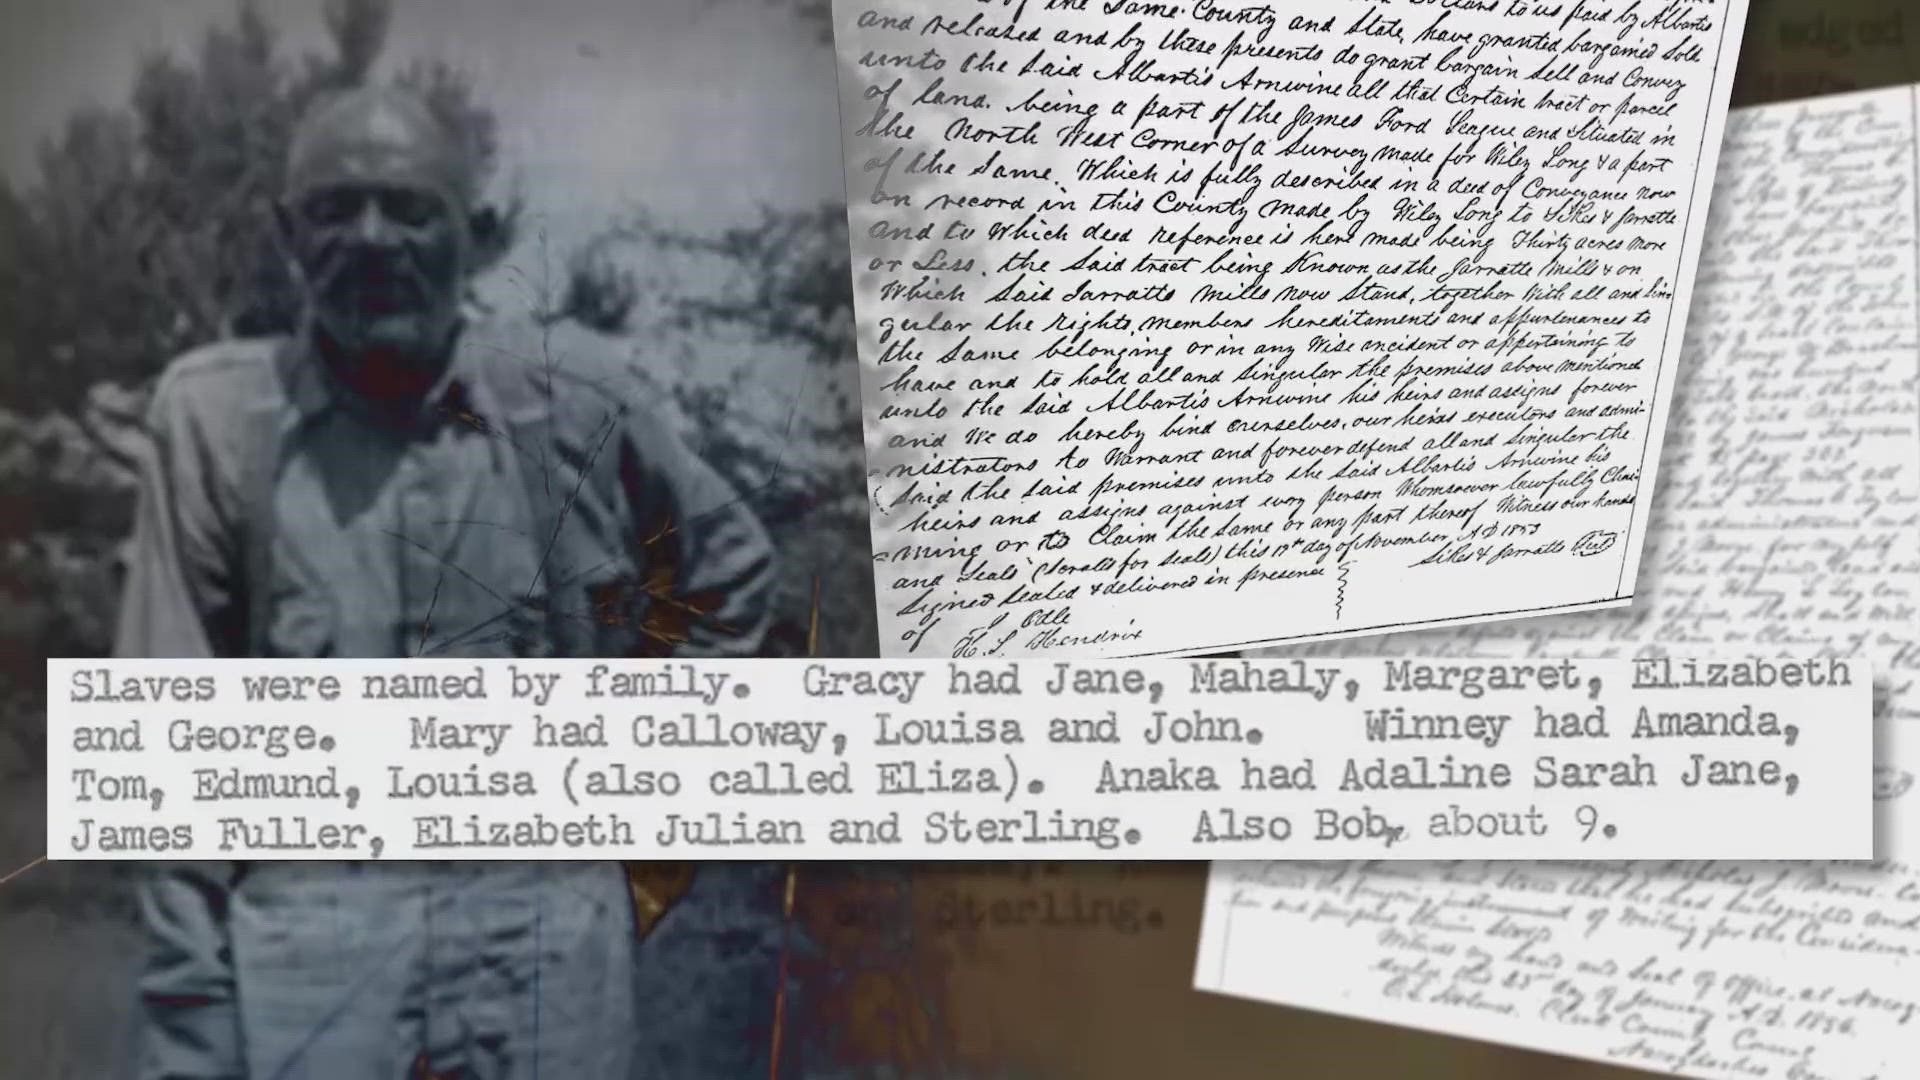 Some far-flung cousins with Texas roots were astounded by a genealogy search and are finding out they may be entitled to land apparently left to enslaved ancestors.